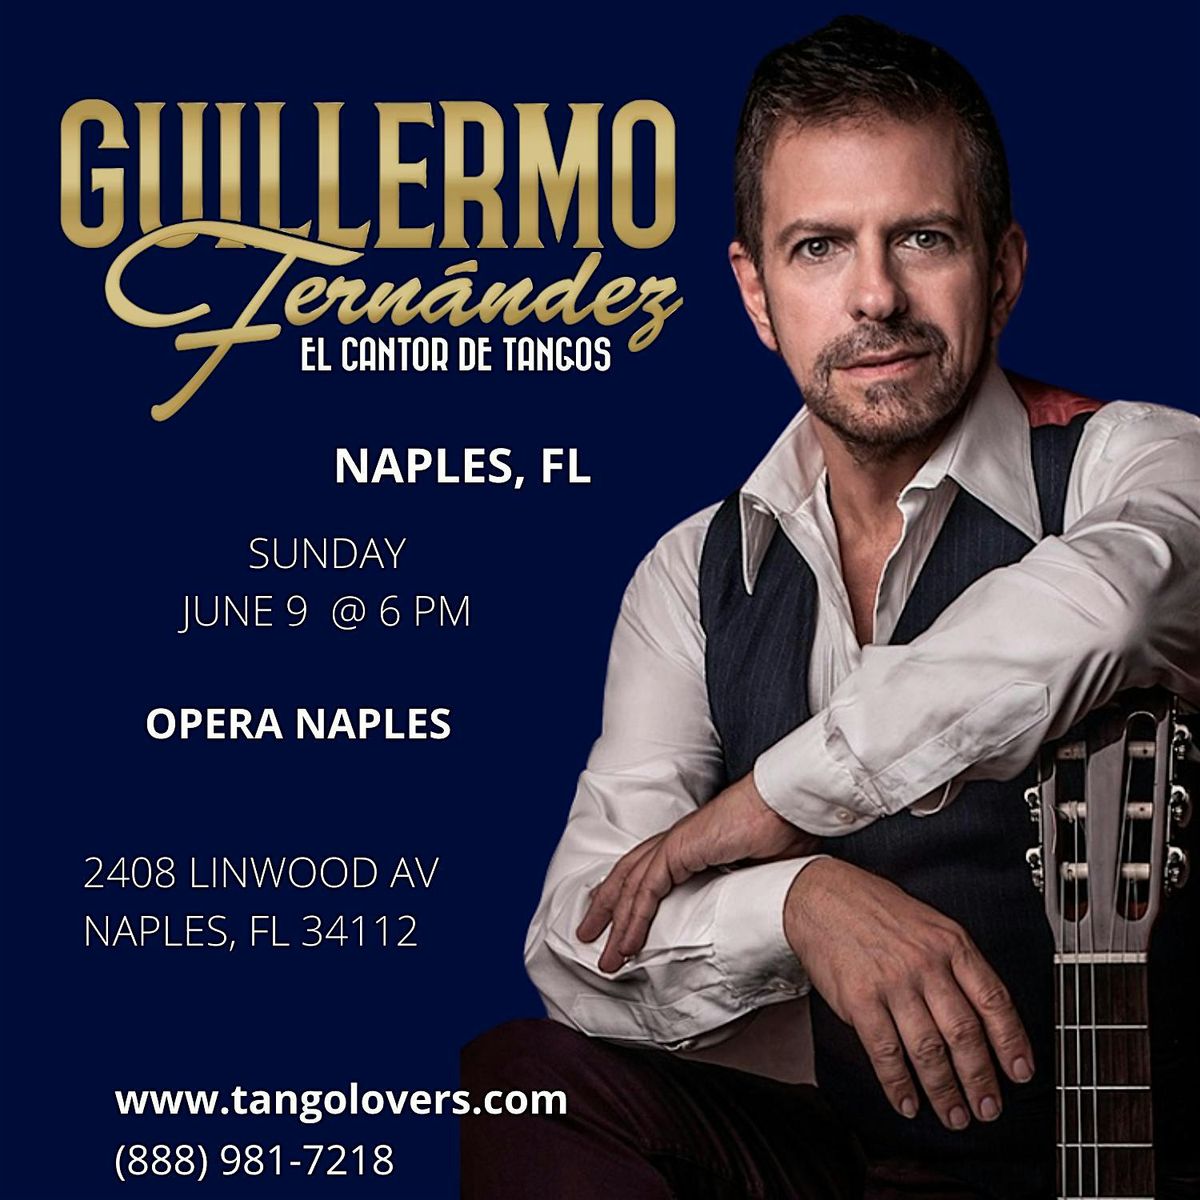 The TANGO and its stories by  singer GUILLERMO FERNANDEZ  in NAPLES, FL